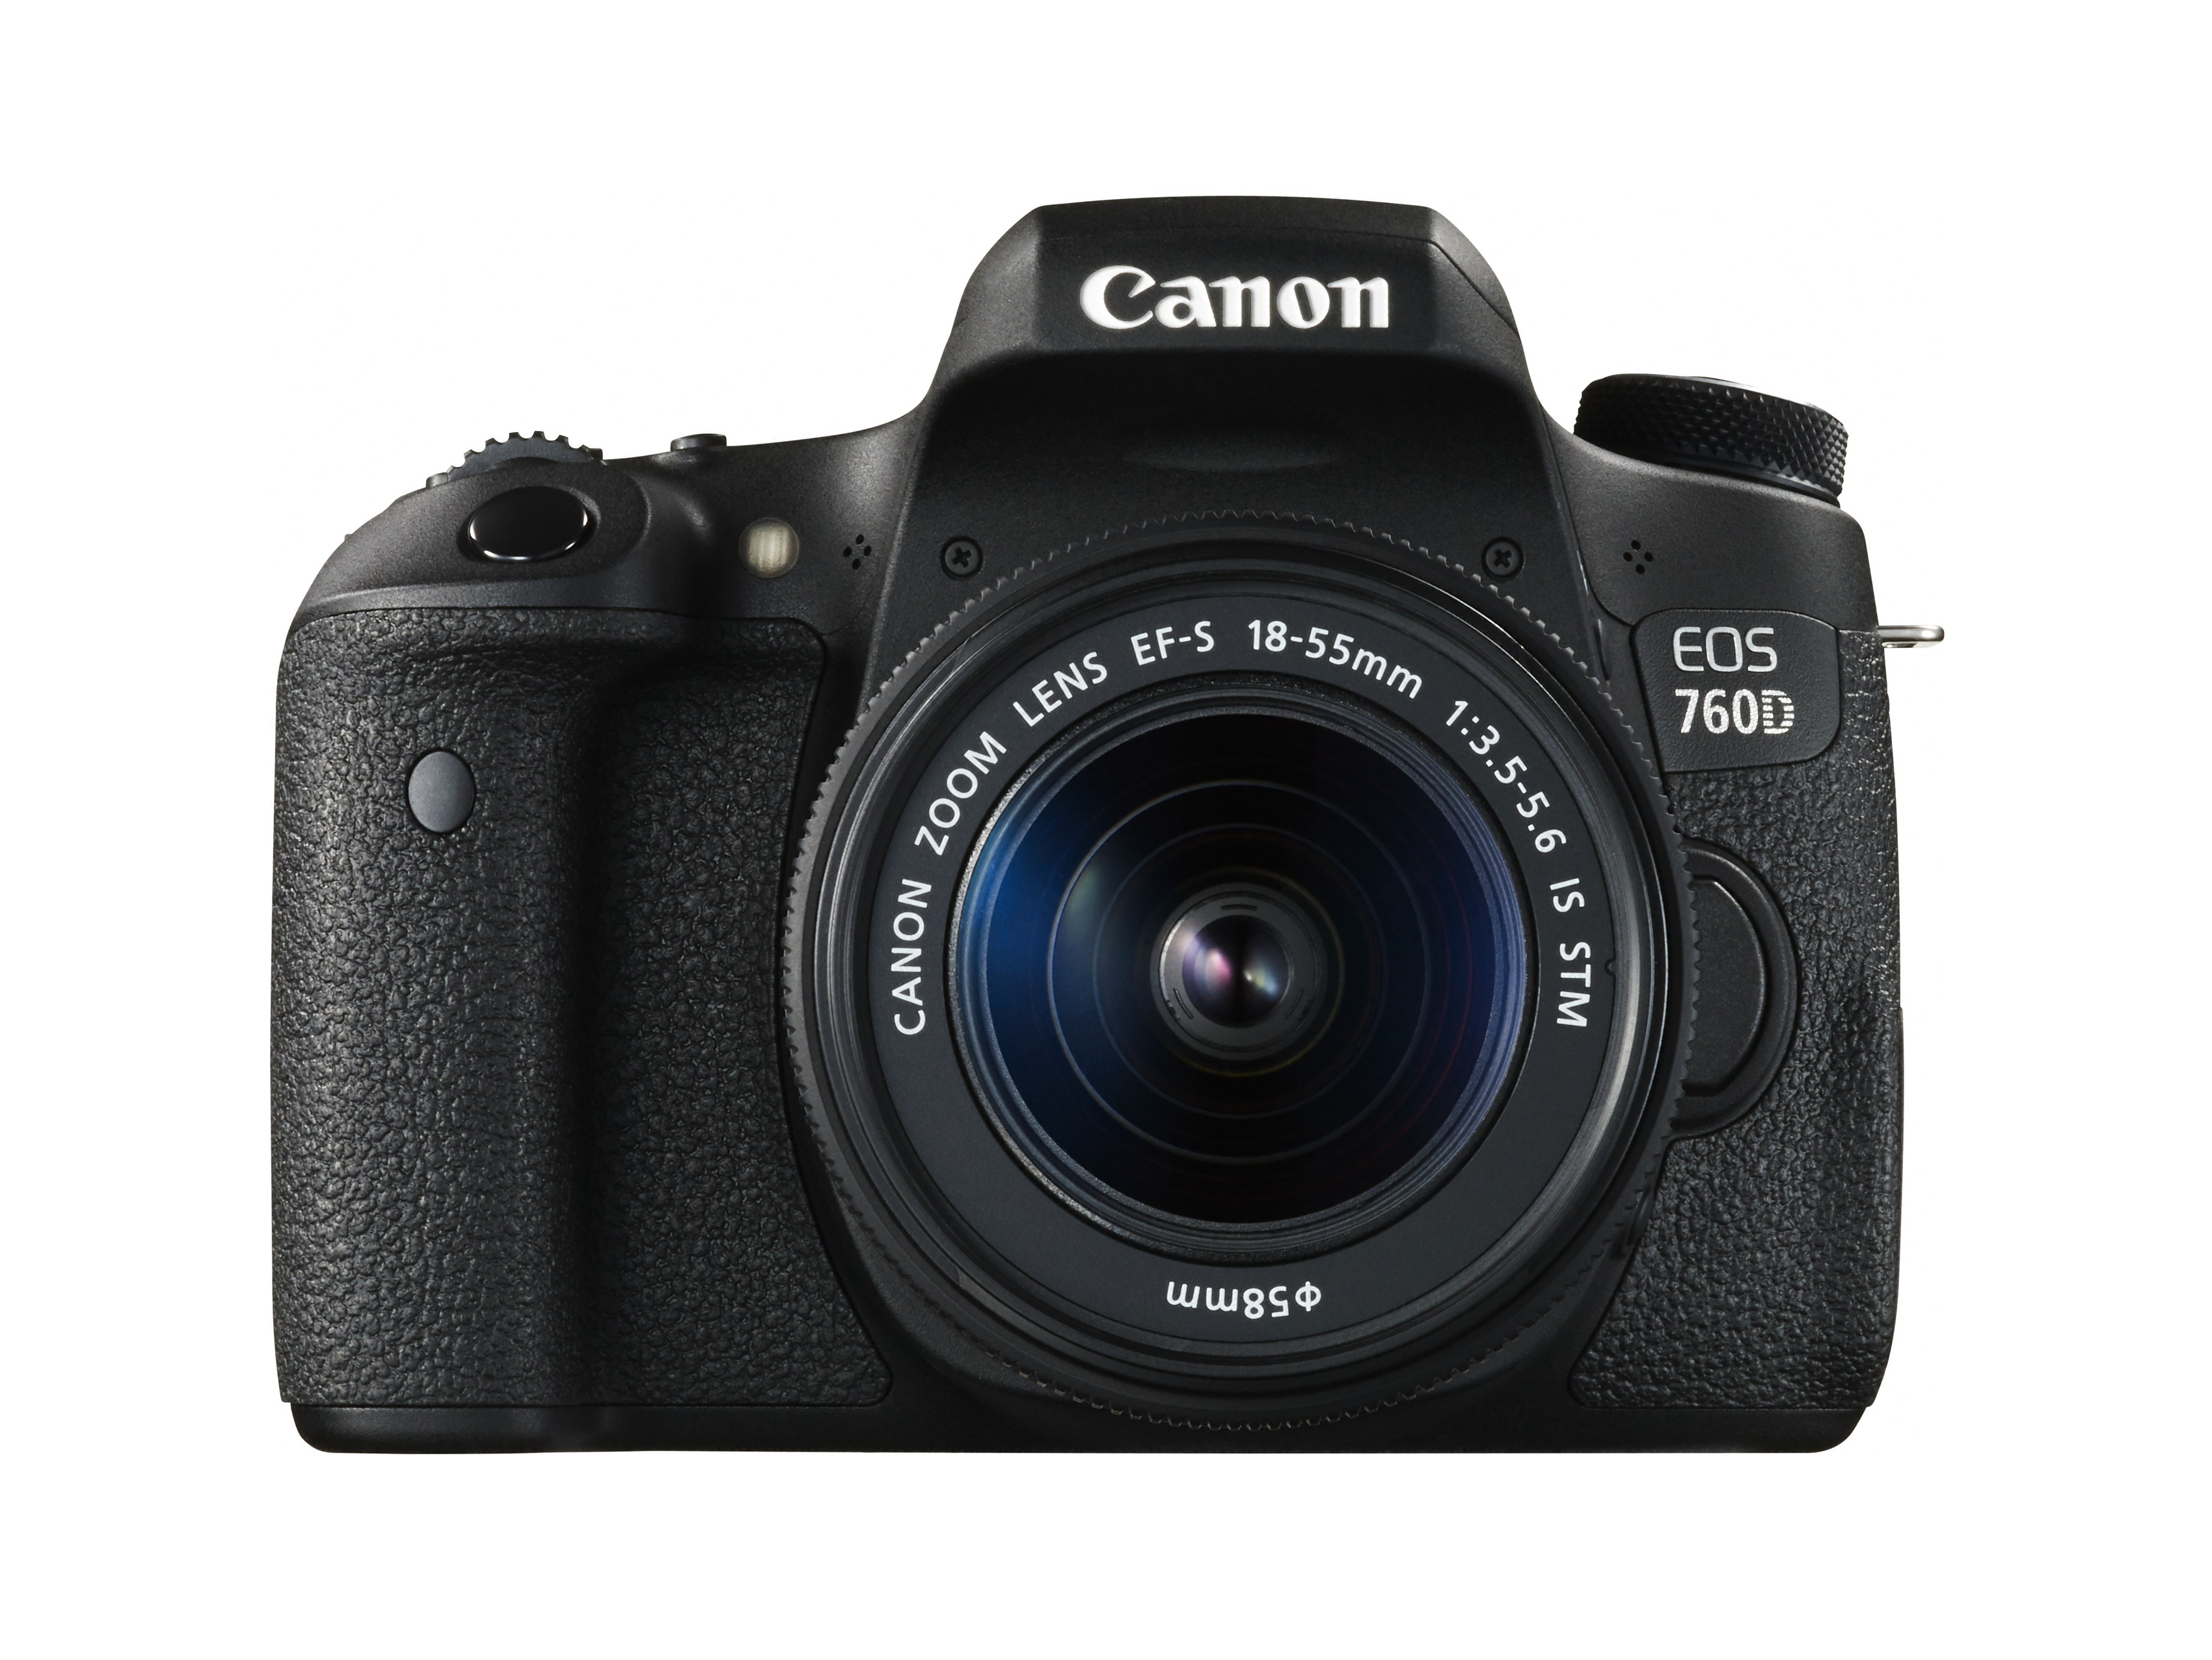 Canon-EOS-760D-Gear-NewRelease-Announced-On-Orms-Connect-Photographic-Blog